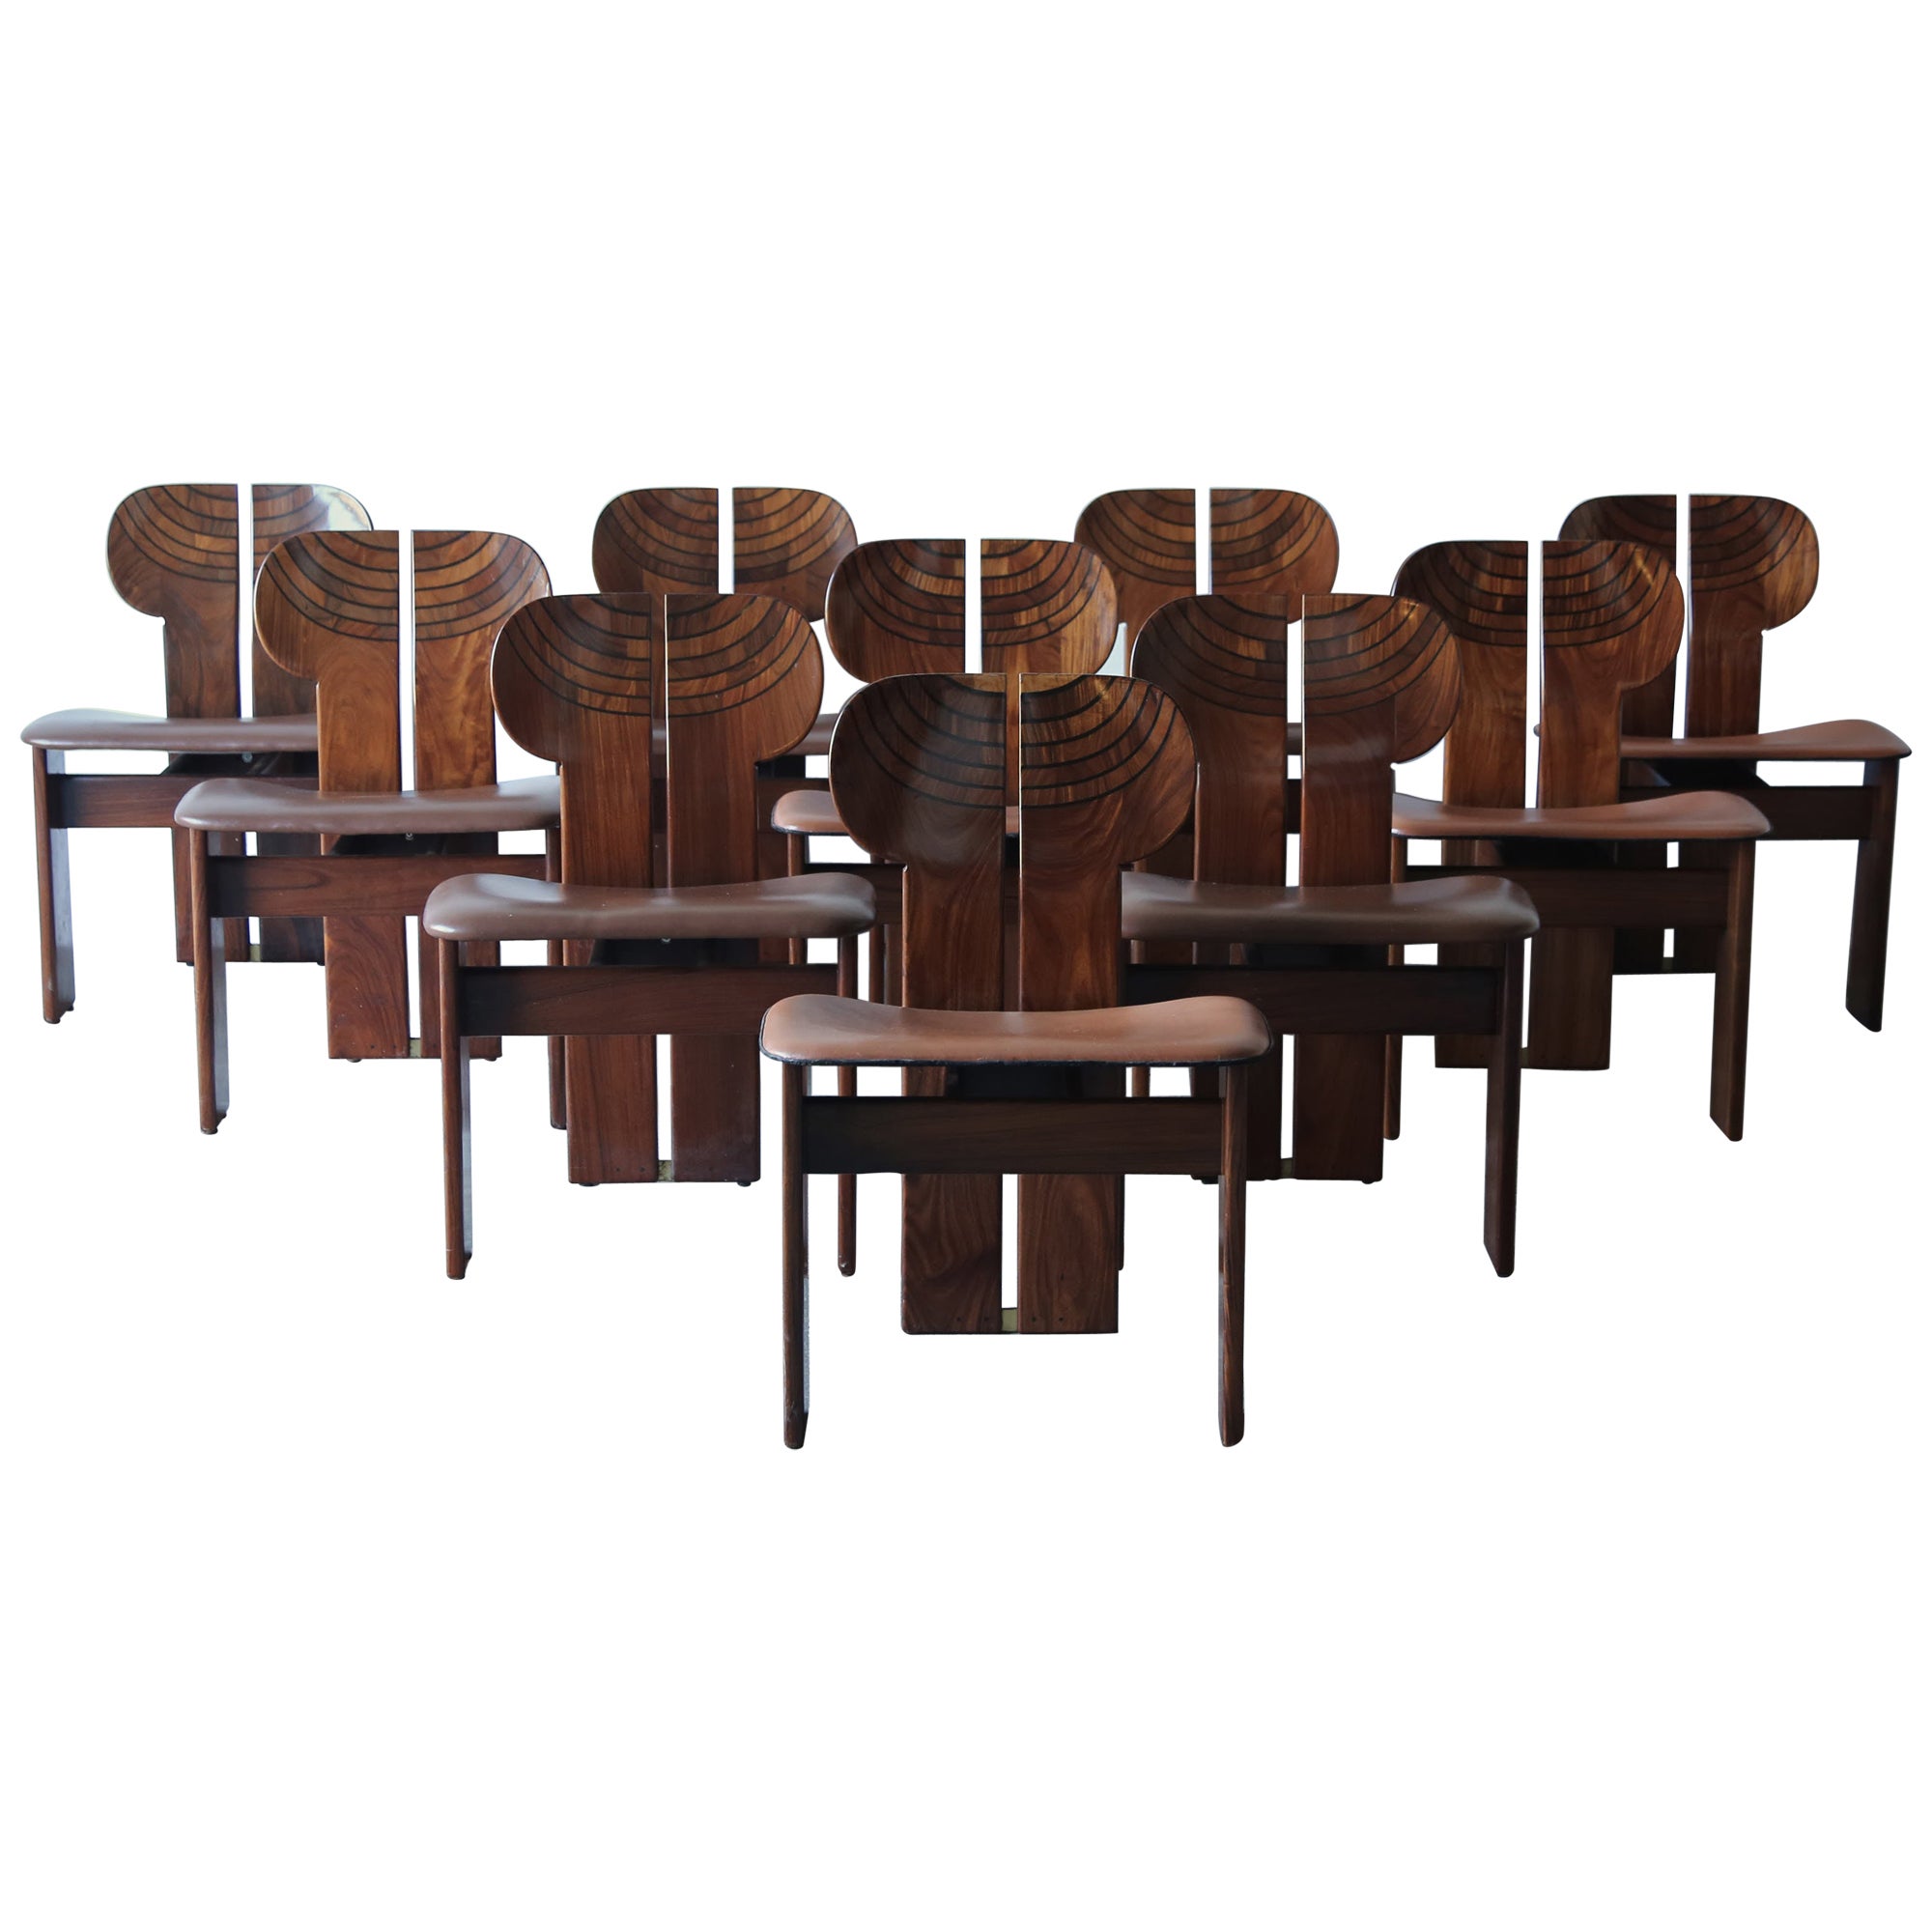 Set of Ten Africa Chairs by Afra & Tobia Scarpa, Maxalto, Italy, 1970s For Sale